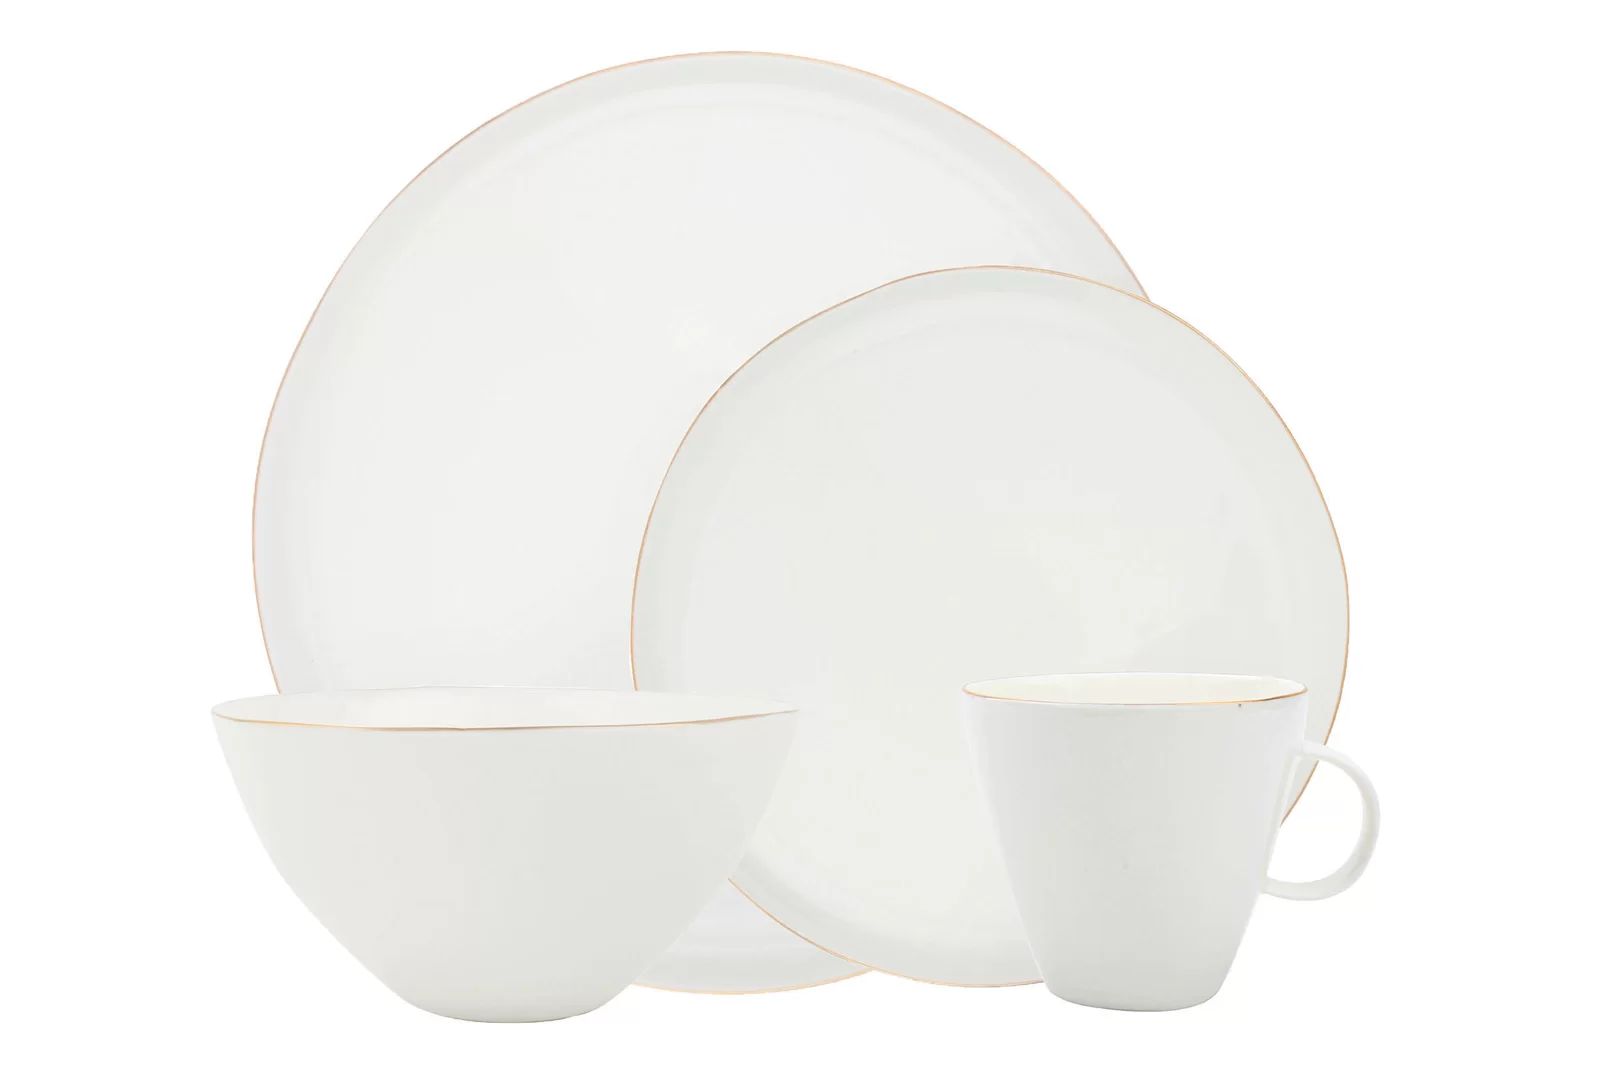 Abbesses 4 Piece Place Setting Set, Service for 1 | Wayfair North America